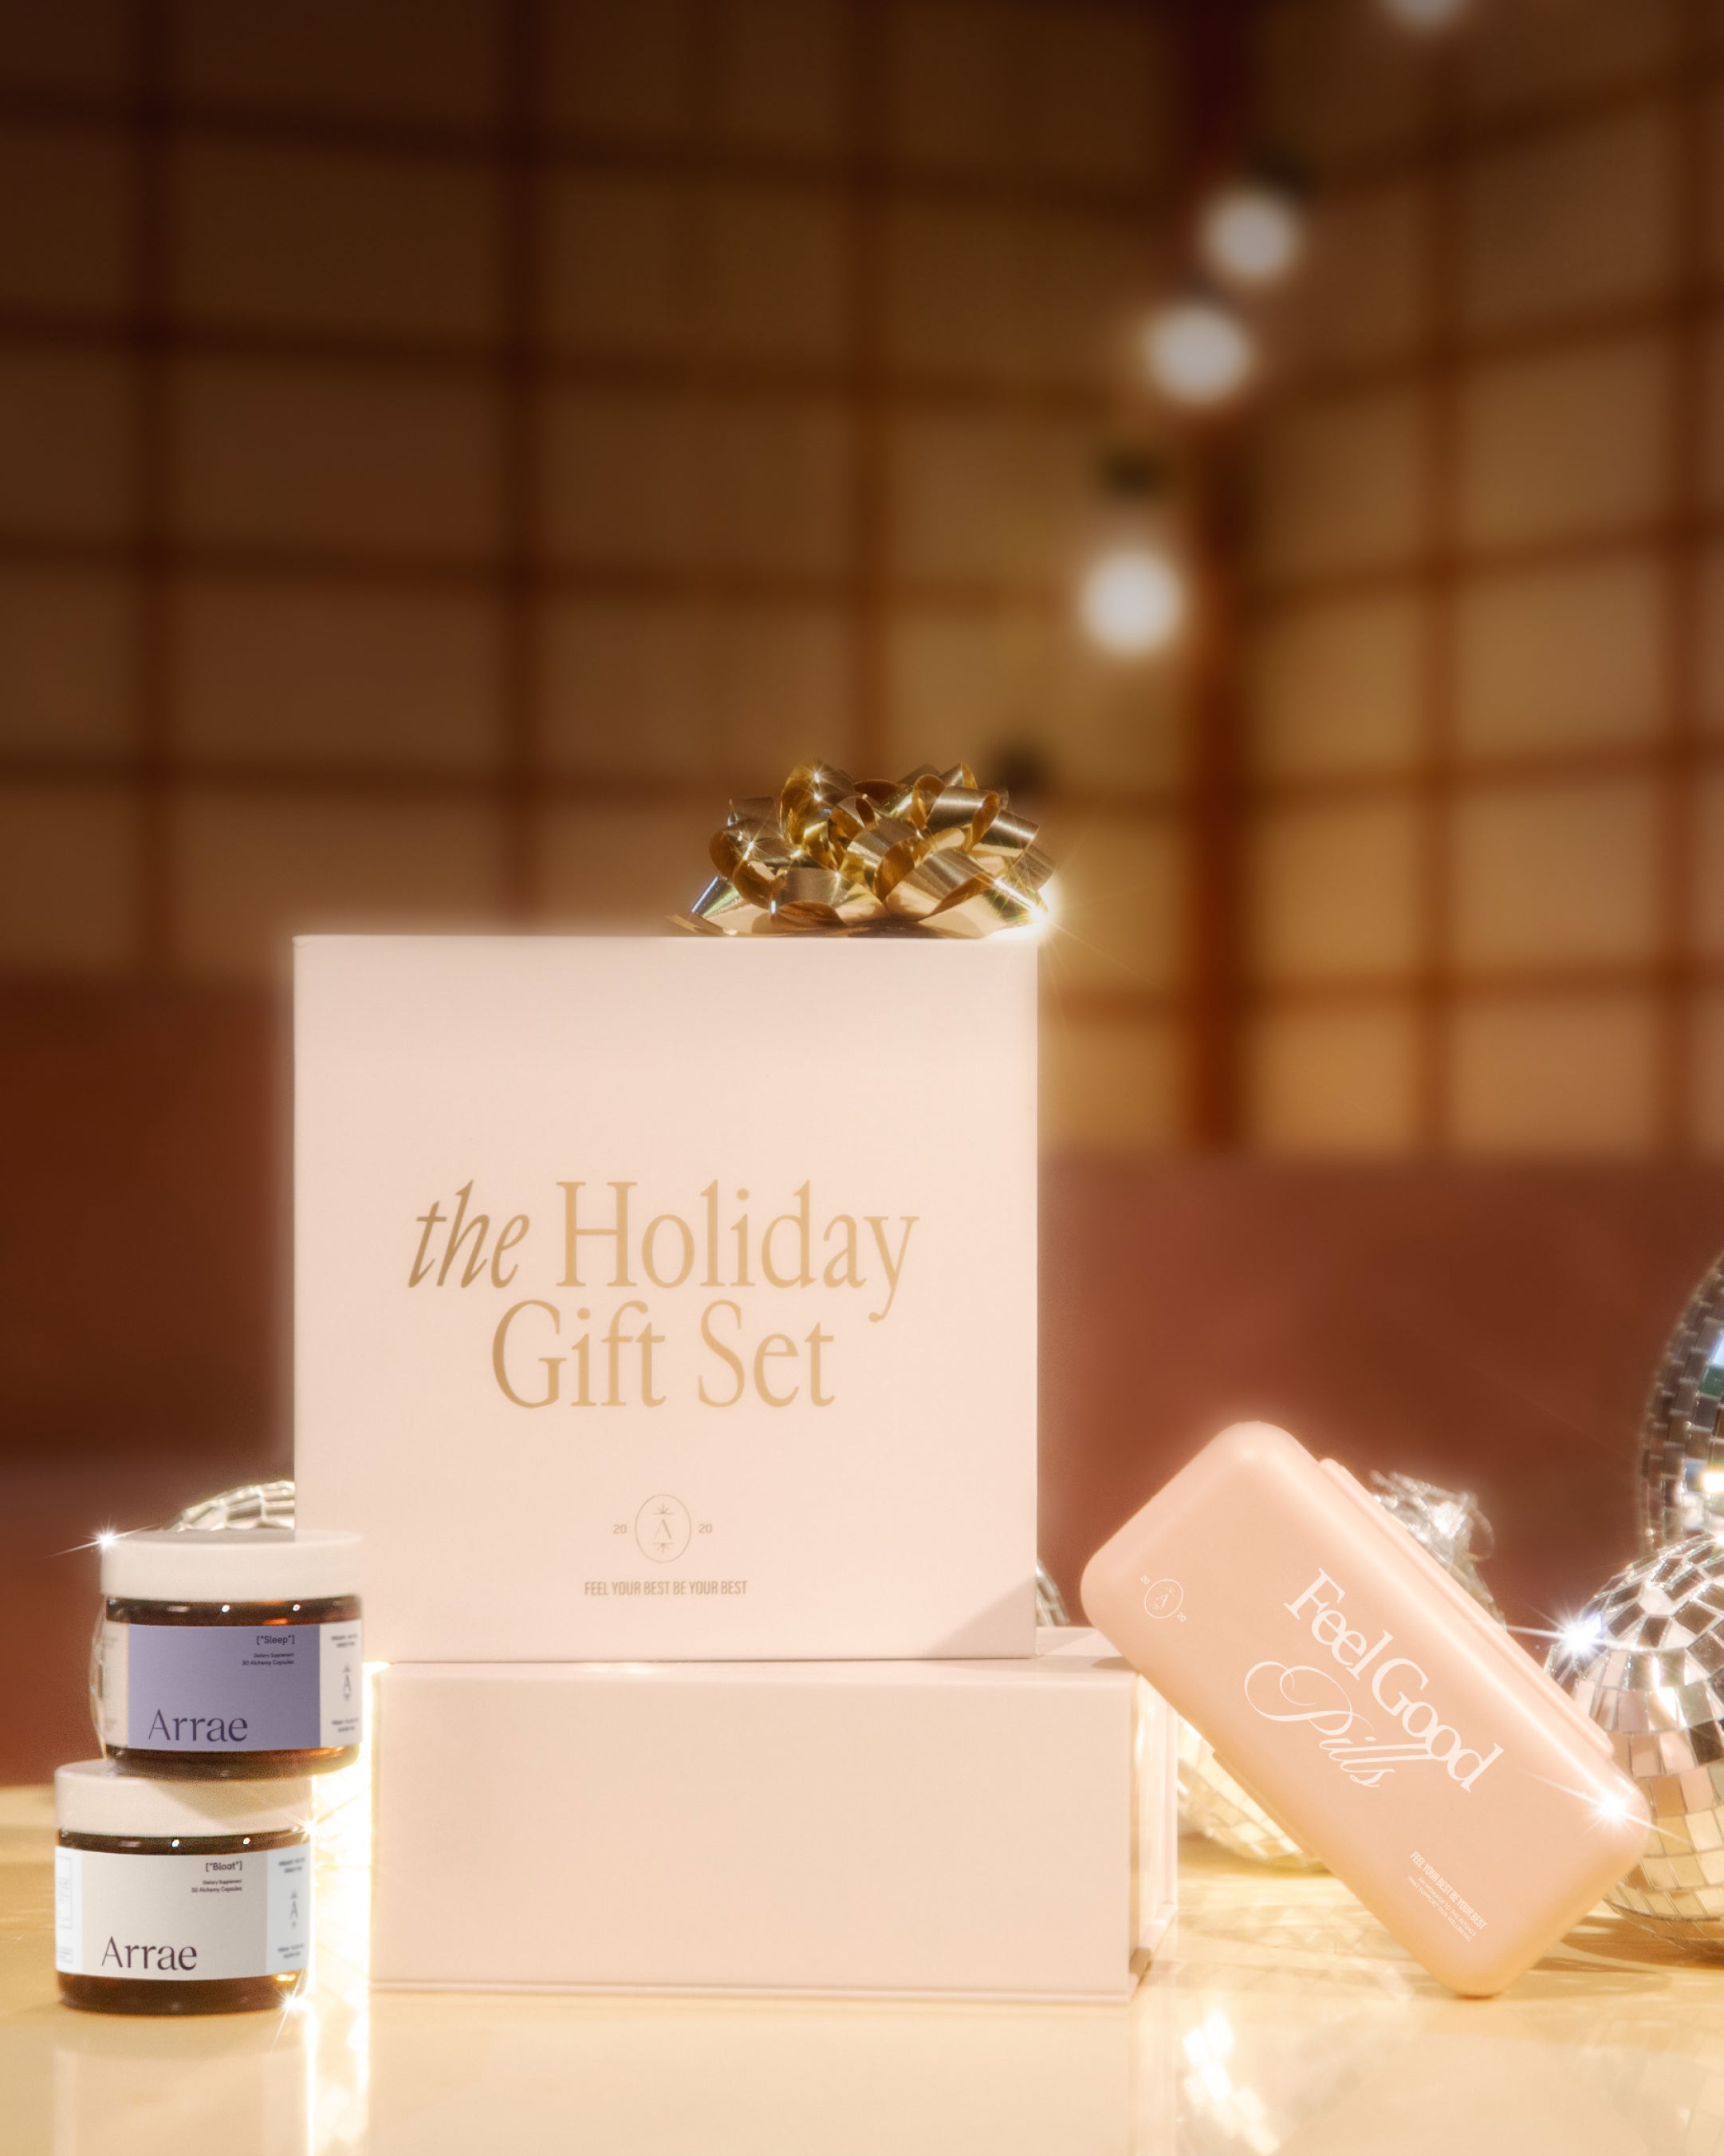 25% off the Holiday Gift Set